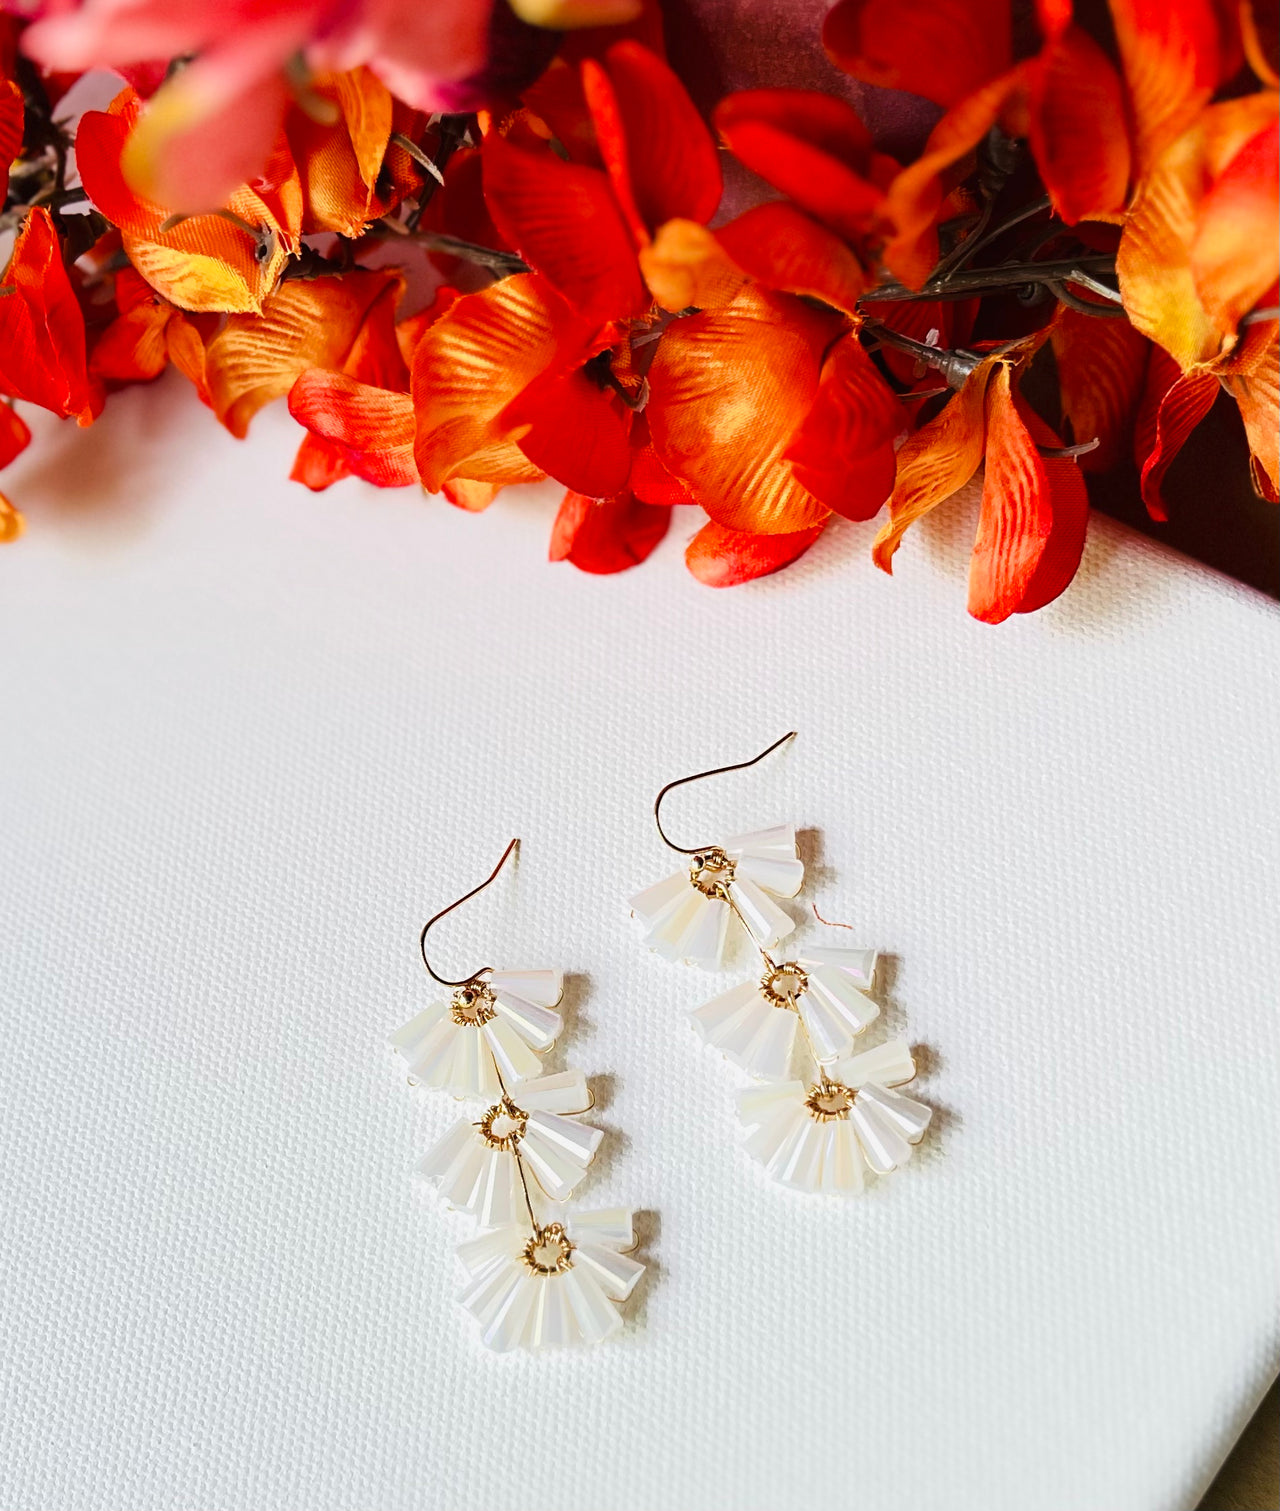 The "Tiered" Beaded earrings